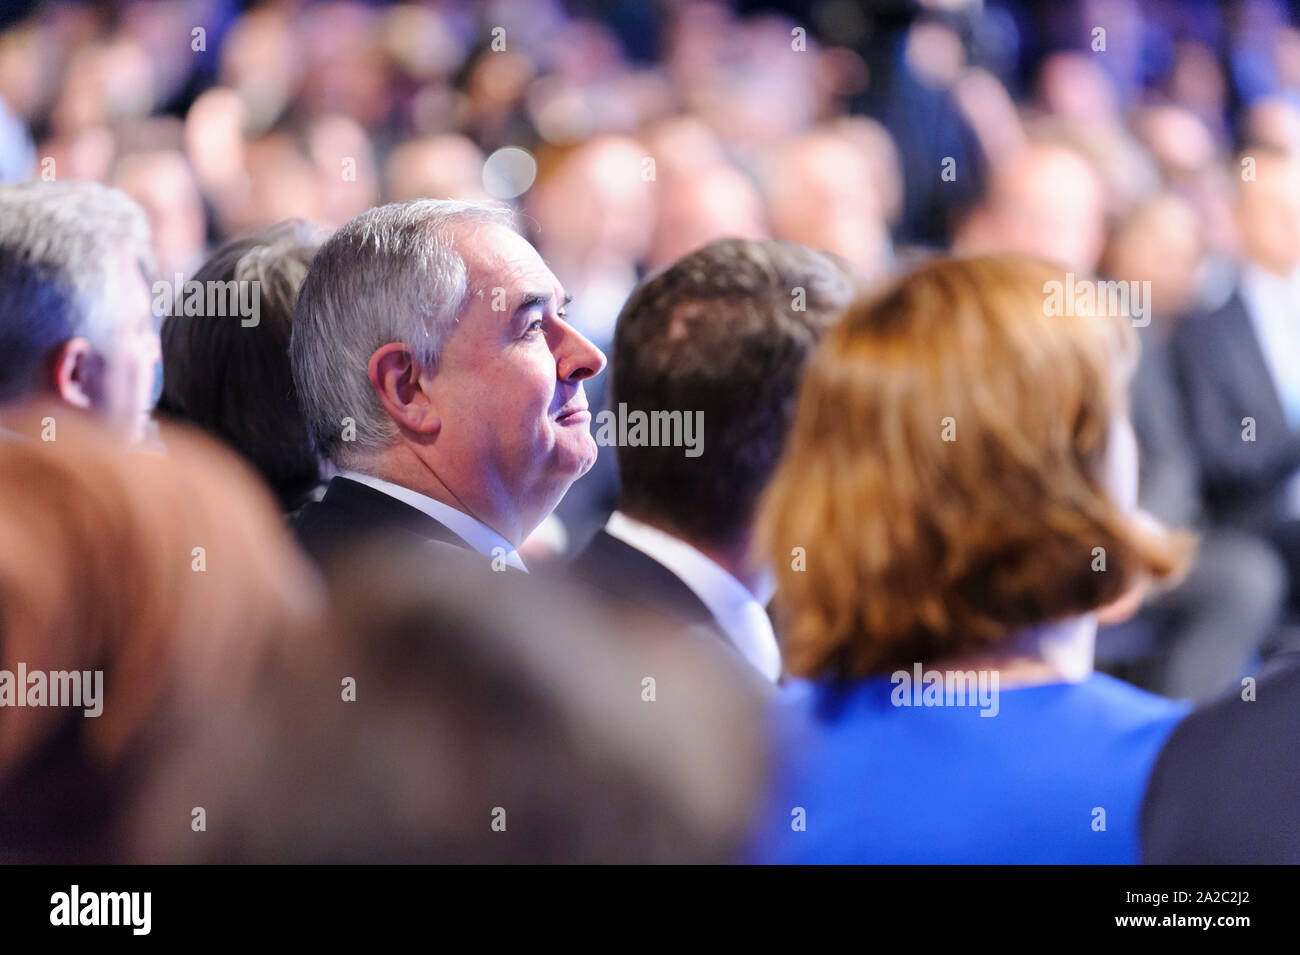 Manchester, UK. 2nd October 2019. Attorney General, The Rt Hon Geoffrey Cox QC MP, watches The Prime Minister, The Rt Hon Boris Johnson MP, deliver his keynote speech on day 4 of the 2019 Conservative Party Conference at Manchester Central. Credit: Paul Warburton/Alamy Live News Stock Photo